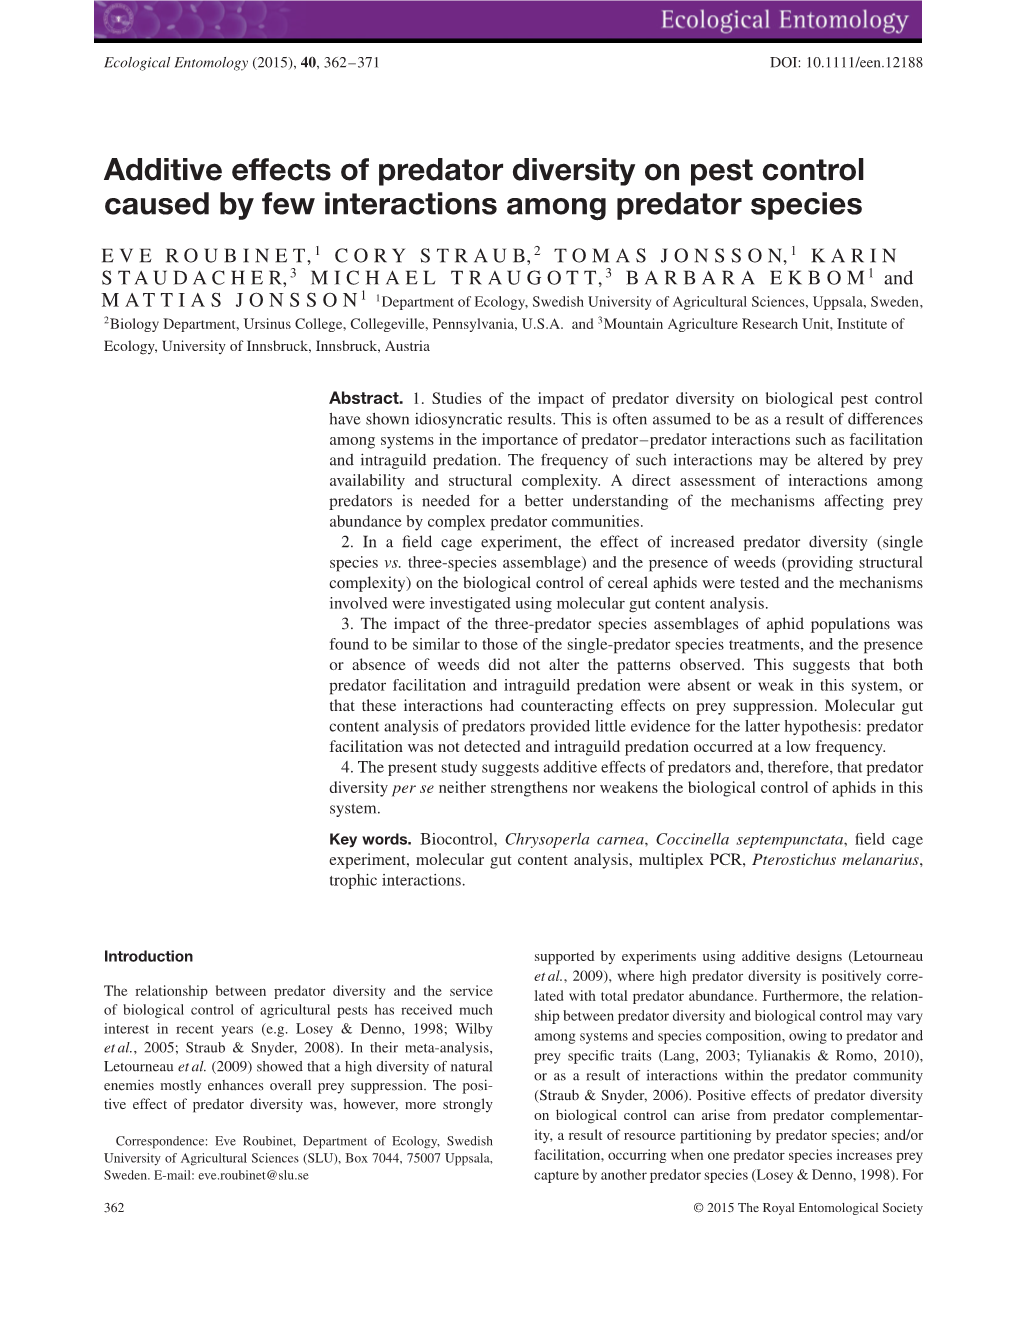 Additive Effects of Predator Diversity on Pest Control Caused by Few Interactions Among Predator Species